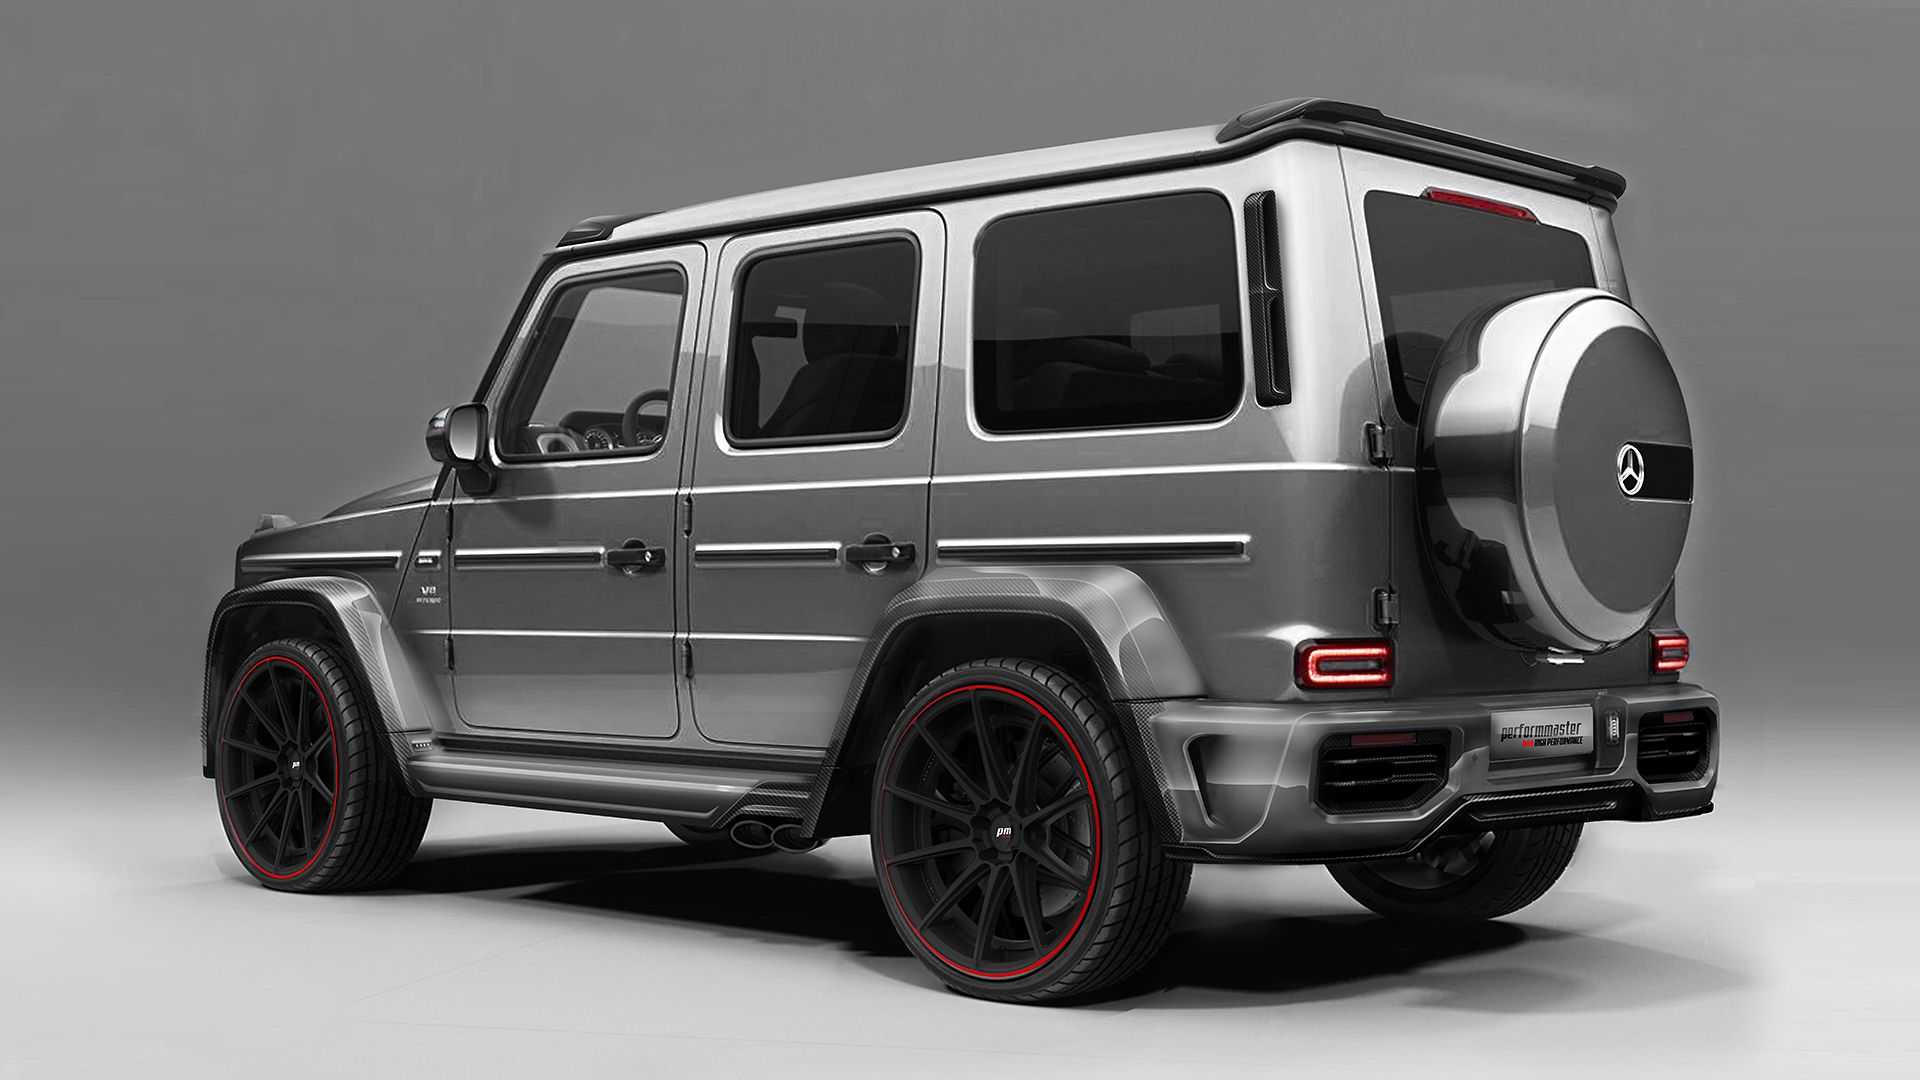 PerformMaster Made the Mercedes-AMG G63 Look Even More Menacing - autoevolution